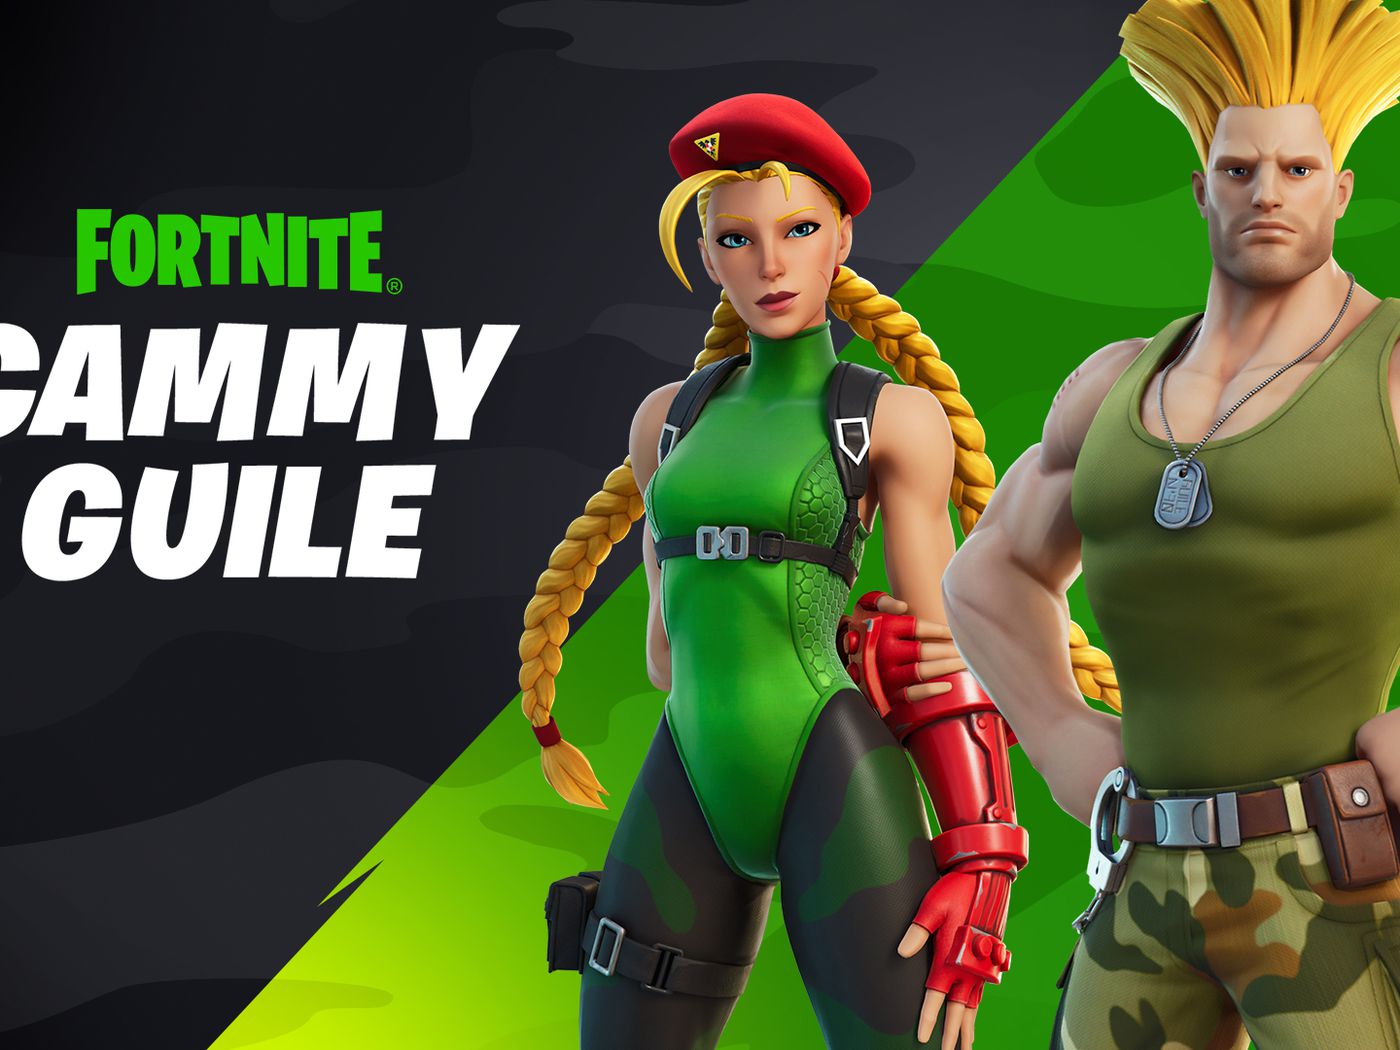 Street Fighter's Guile and Cammy are coming to Fortnite